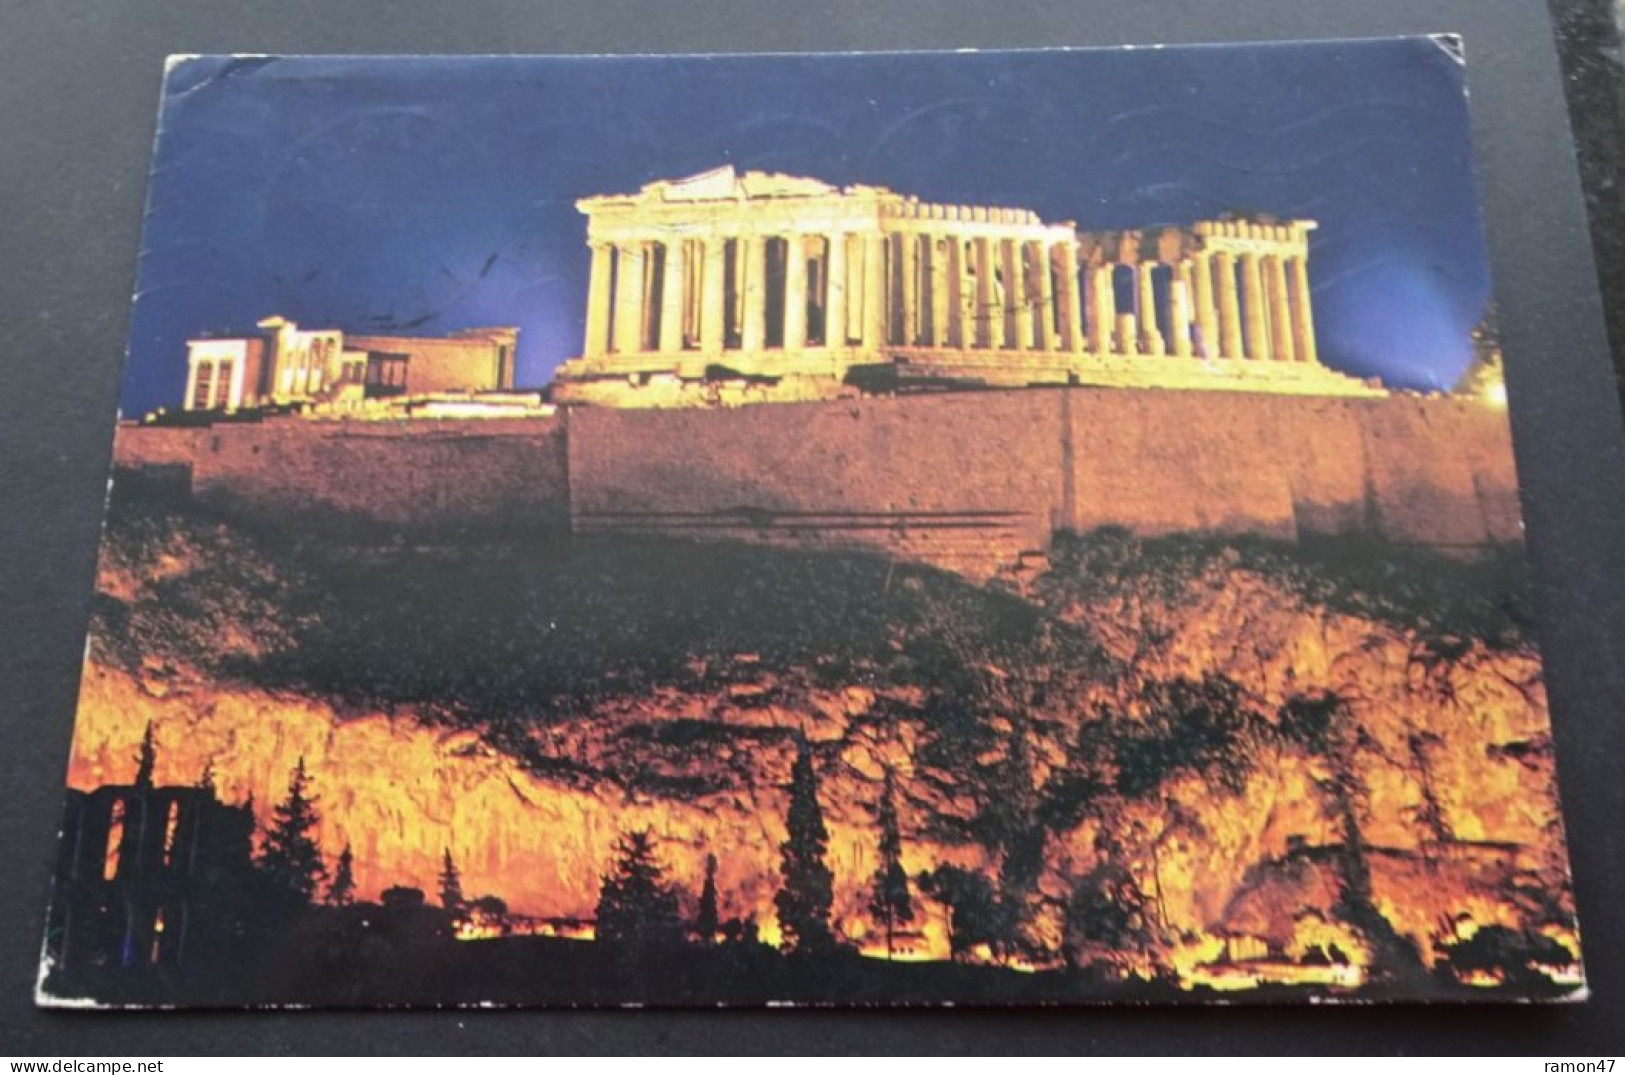 Athens - Acropolis At Night - Griechenland